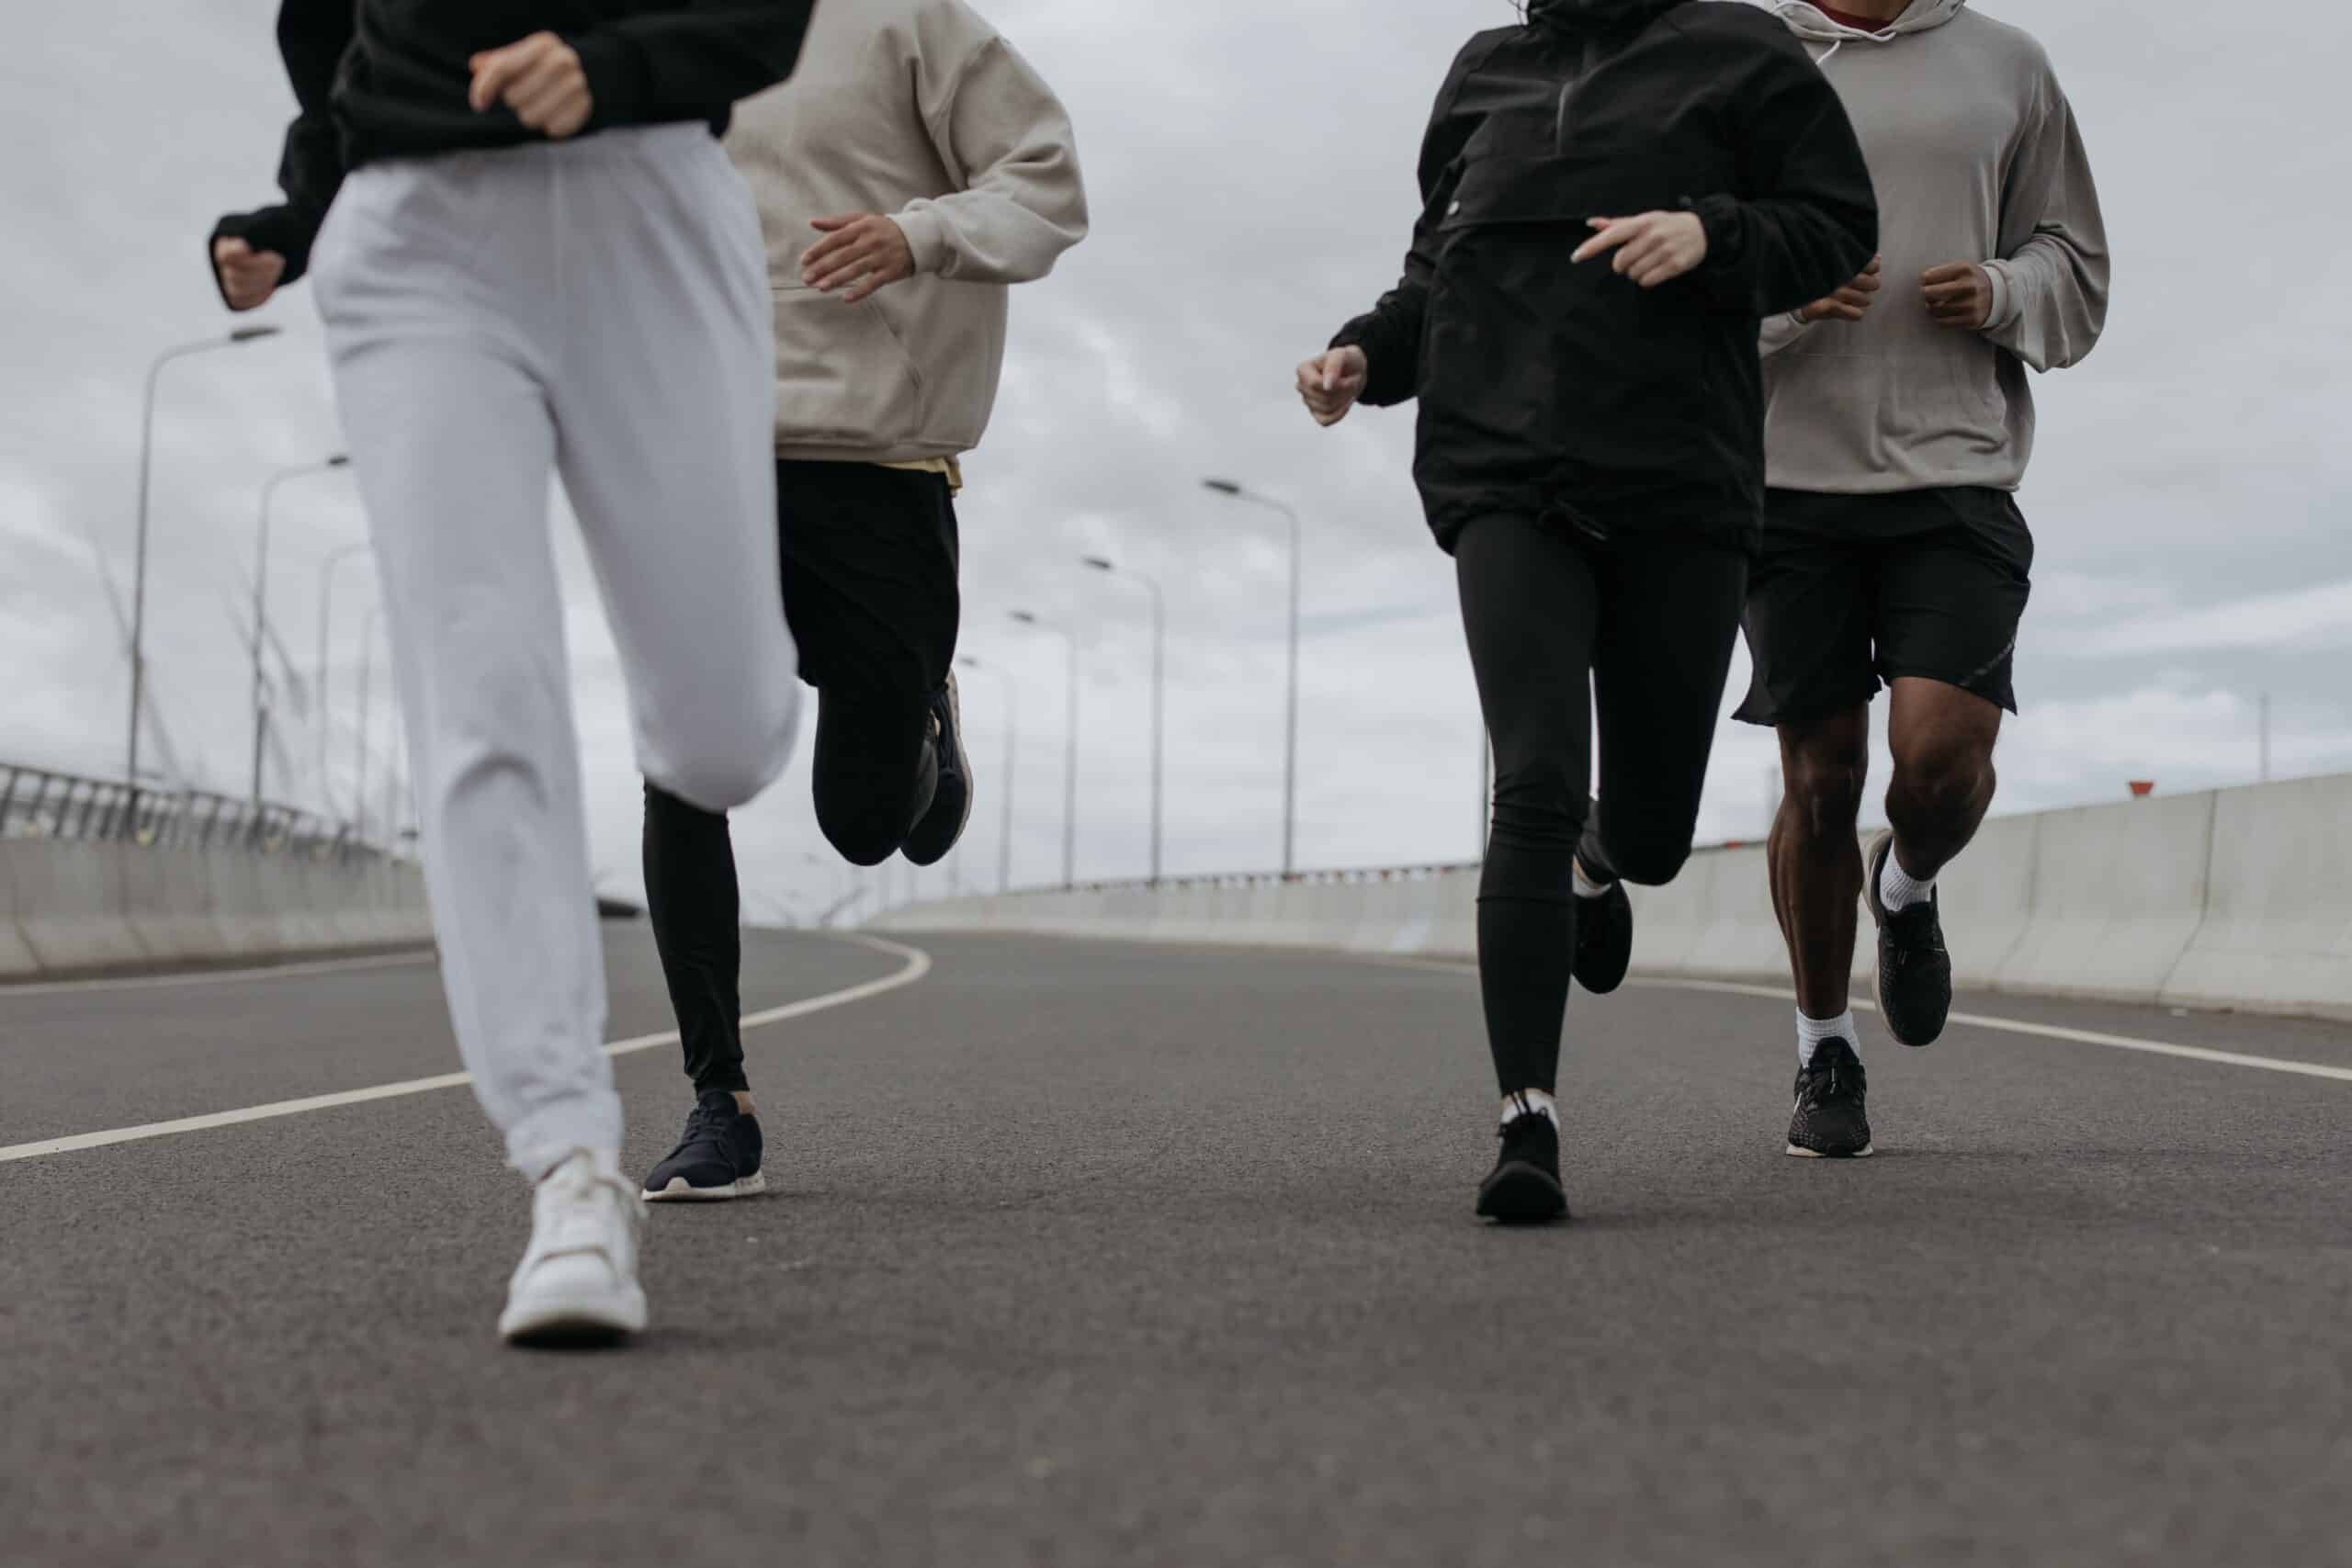 Joggers representing wrongful dismissal in a nutrition company